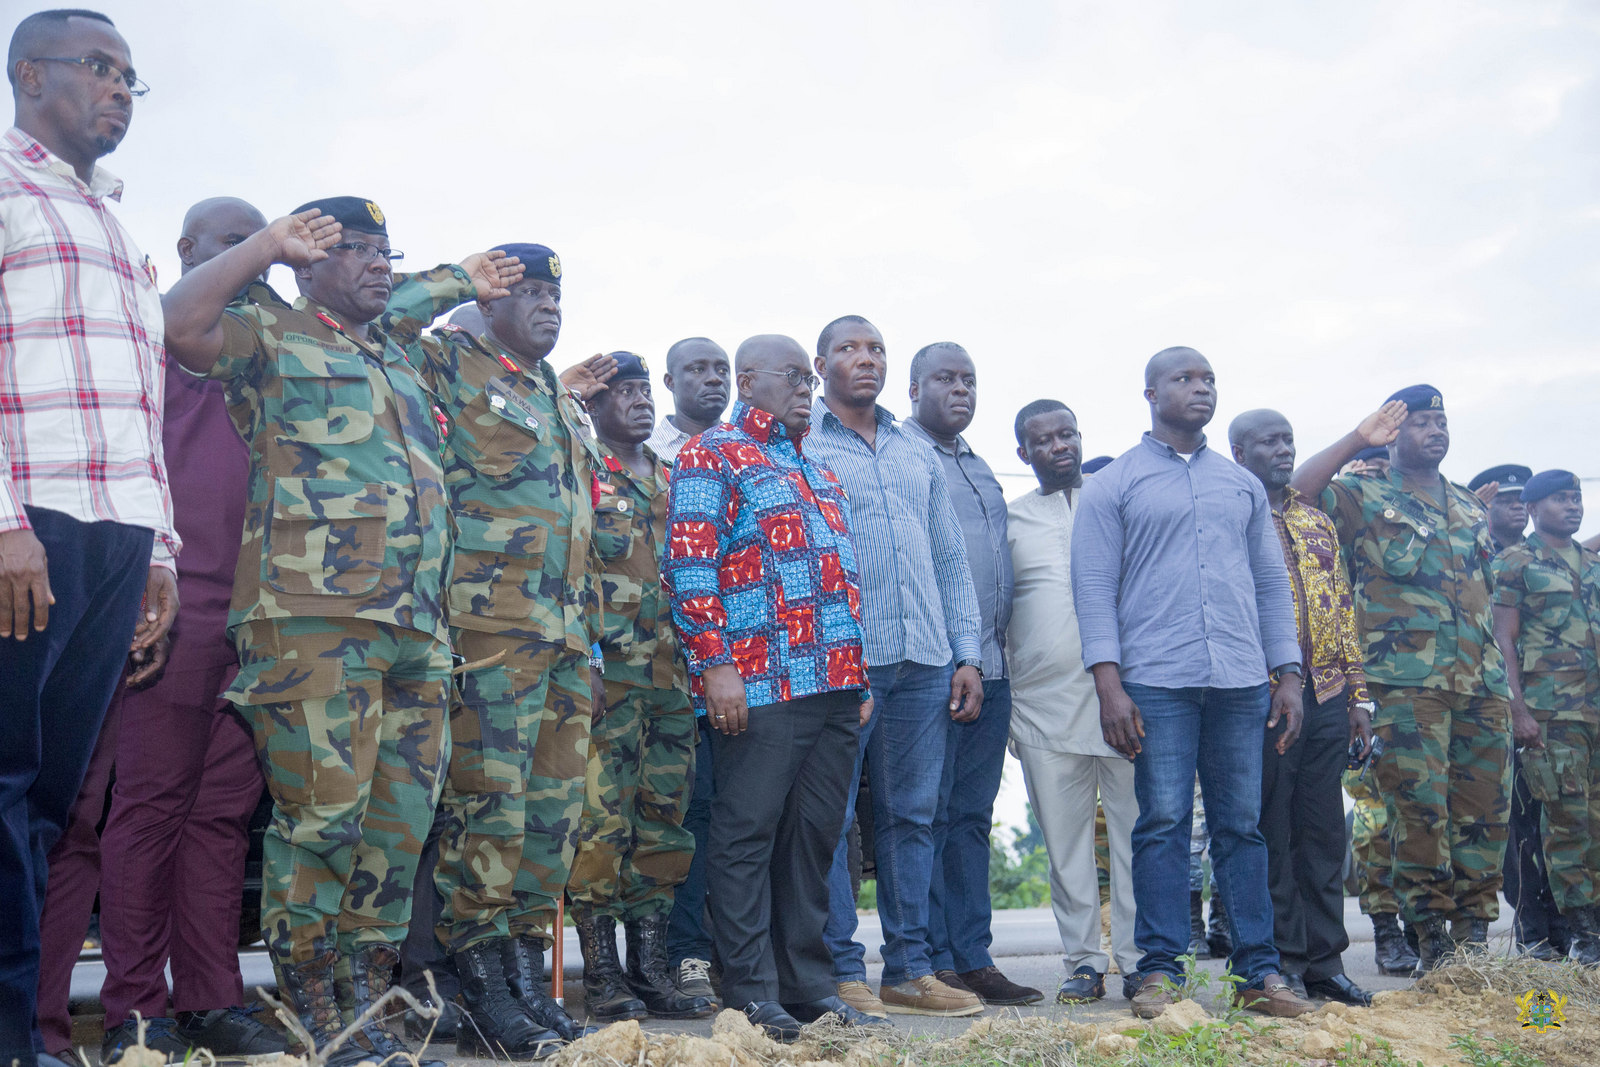 President Akufo-Addo at the site where Major Maxwell Mahama died